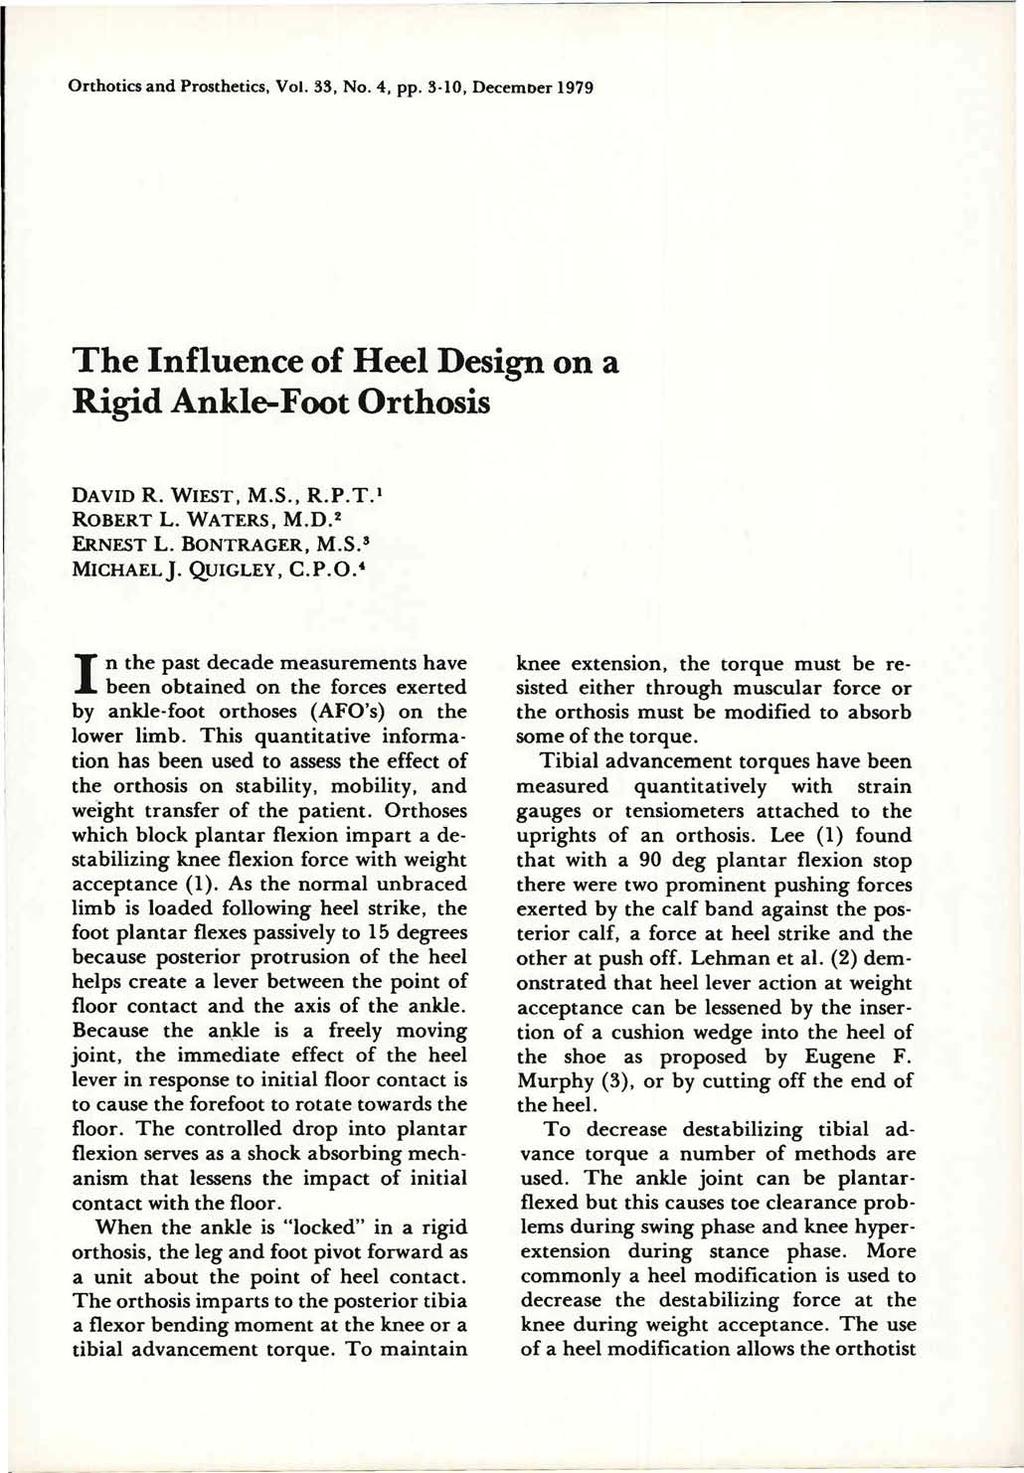 The Influence of Heel Design on a Rigid Ankle-Foot Orthosis DAVID R. WIEST, M.S., R.P.T. 1 ROBERT L. WATERS, M.D. 2 ERNEST L. BONTRAGER, M.S.3 MICHAEL J. QUIGLEY, C.P.O. 4 In the past decade measurements have been obtained on the forces exerted by ankle-foot orthoses (AFO's) on the lower limb.